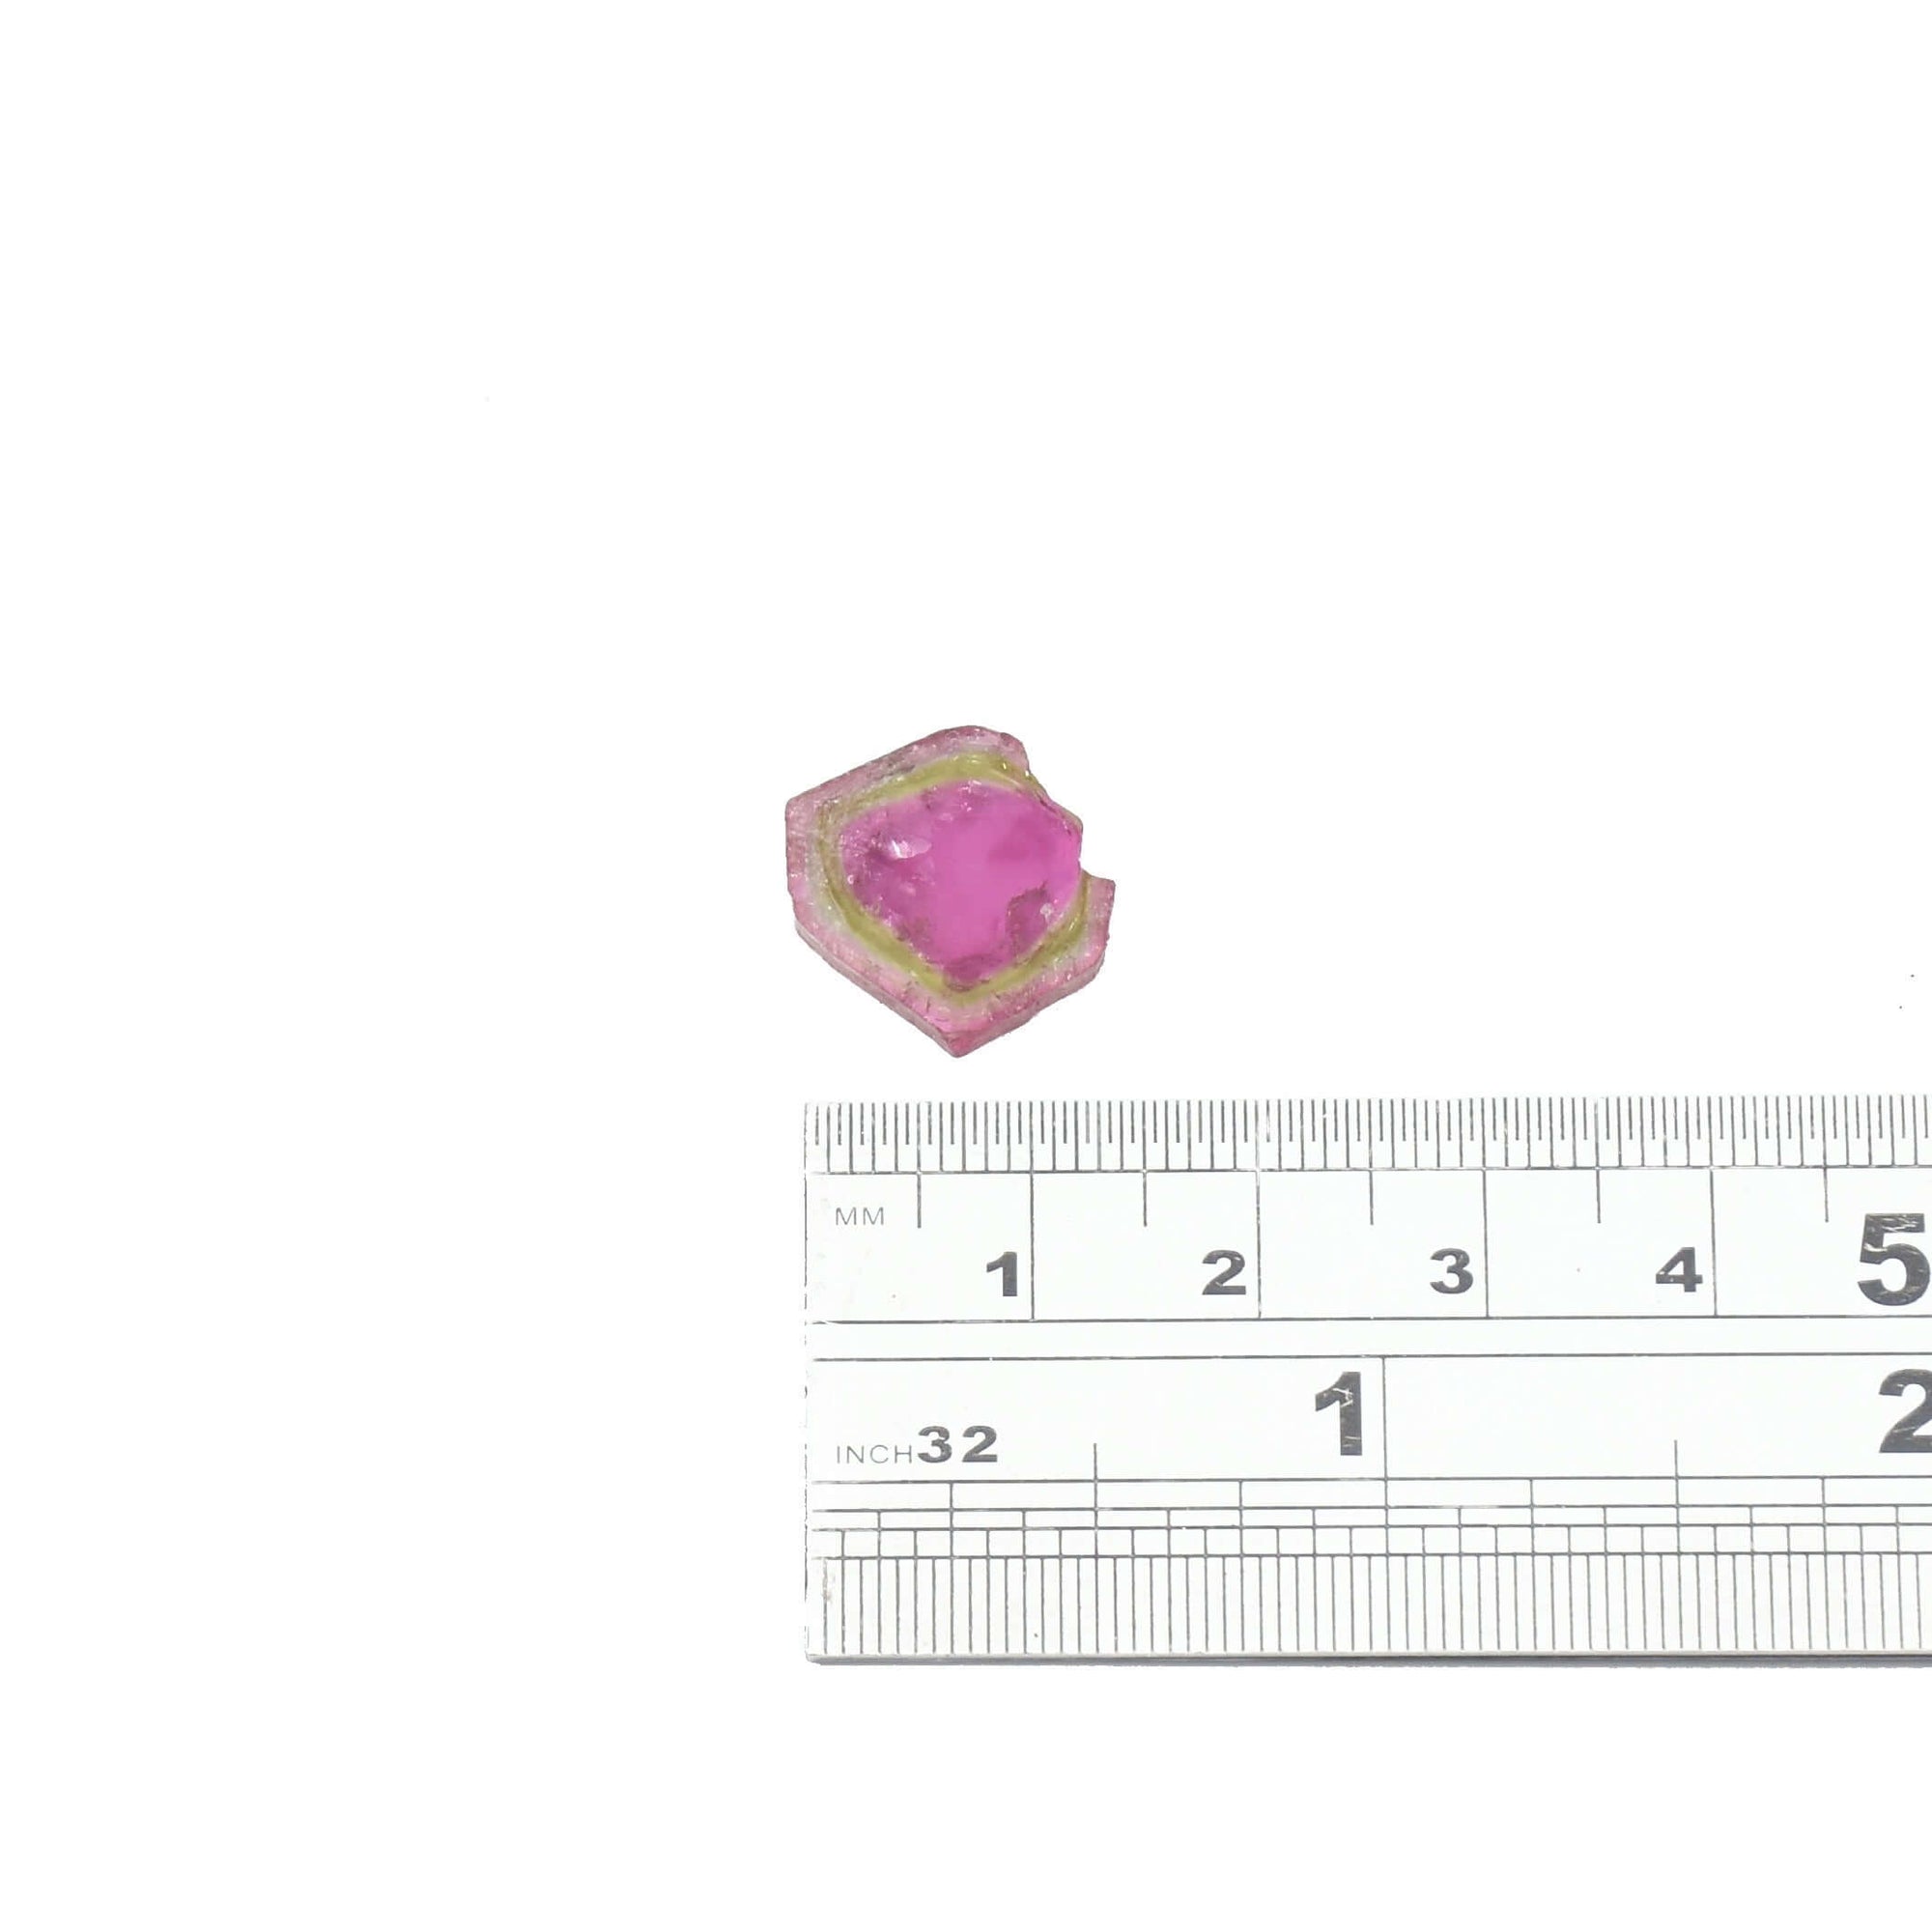 This pink and green loose watermelon tourmaline slice is ready for a custom tourmaline ring design